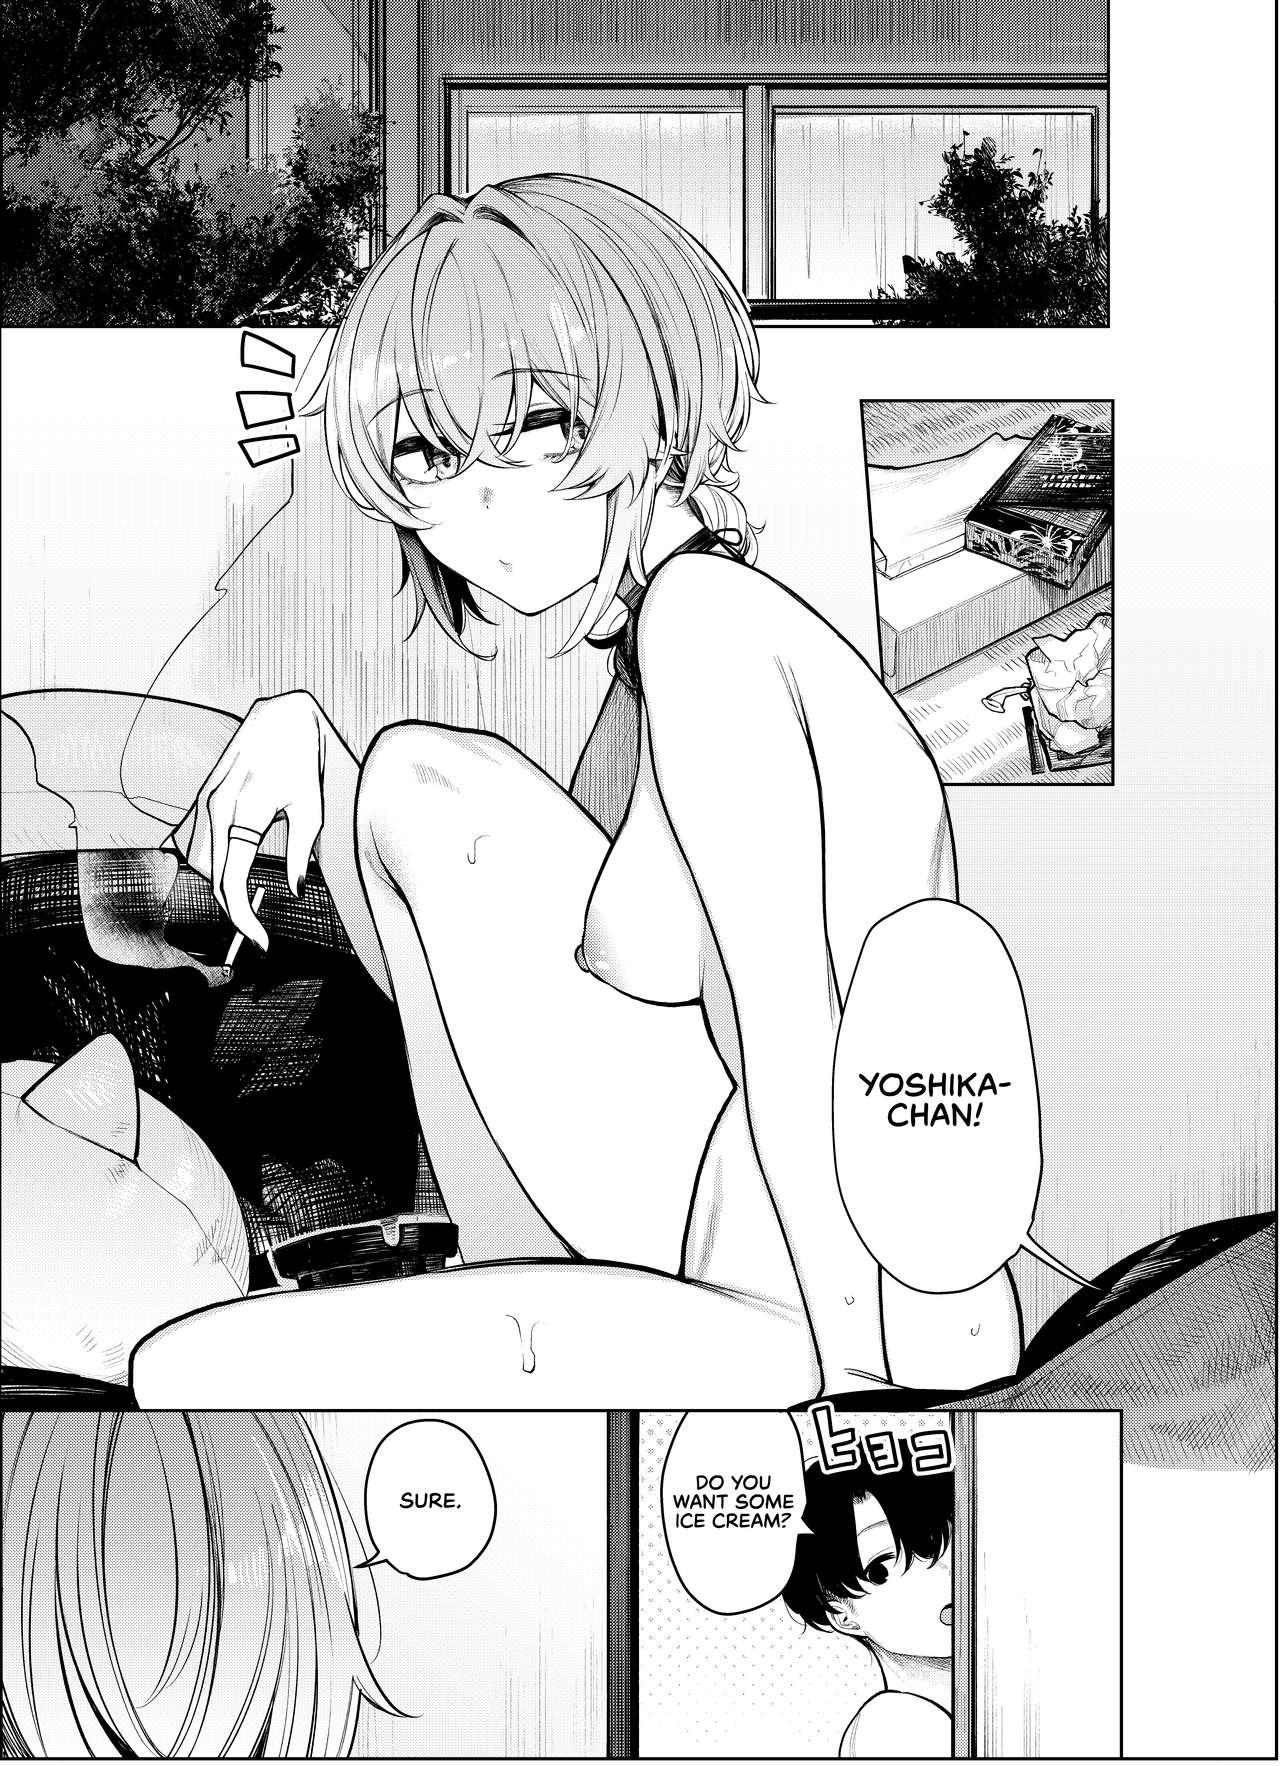 Free Rough Porn Furyouppoi Kanojo to Daradara Omocha de Mou Ikkai. | Leisurely Playing With Sex Toys With My Delinquent-looking Girlfriend, Yet Again. - Original Free Fucking - Page 6